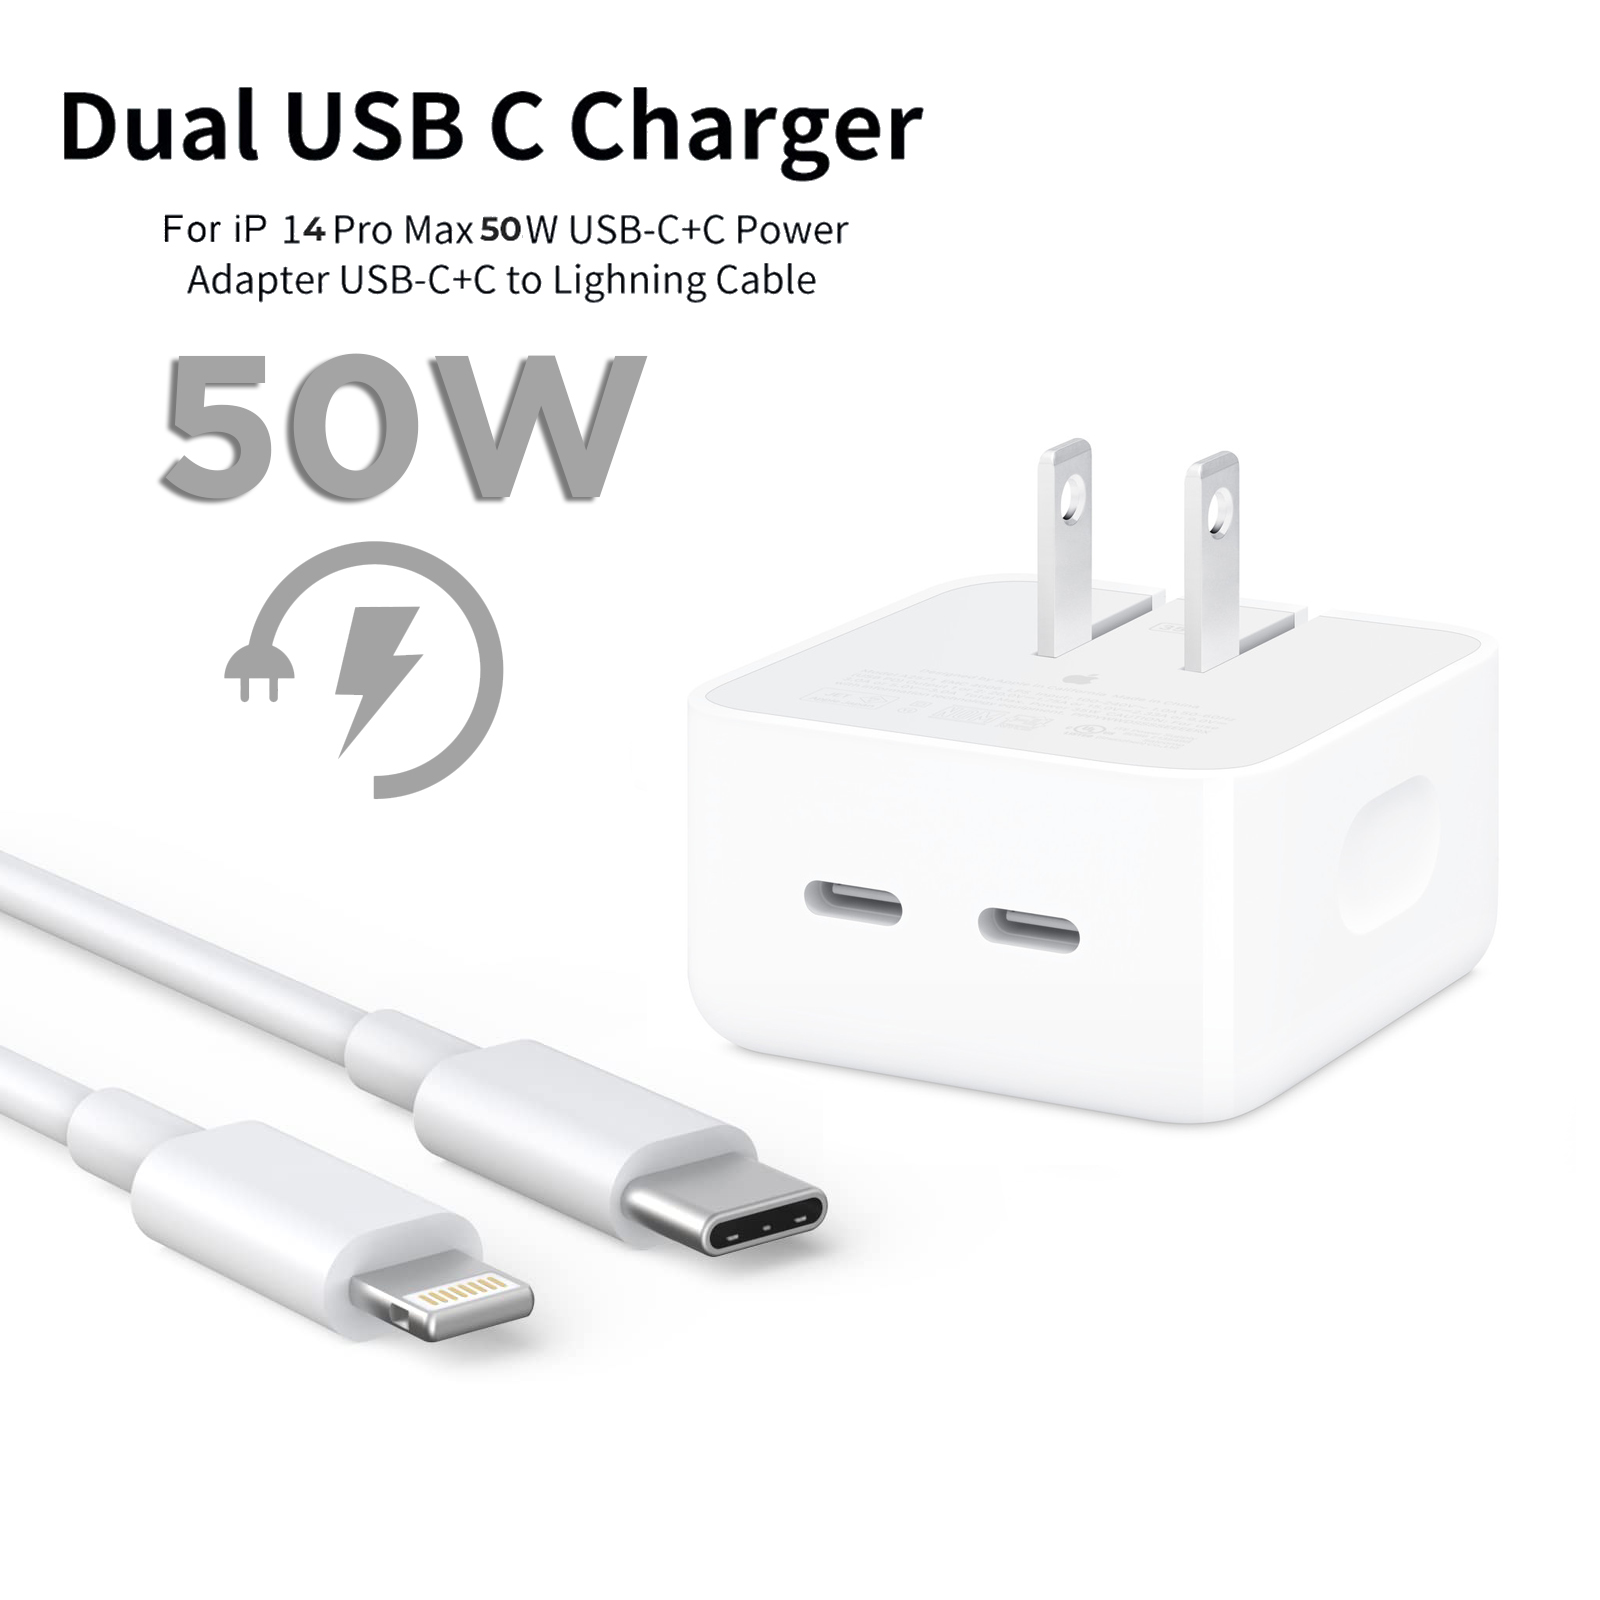 iphone_14_pro_2_pin_us_pin_50w_usb-cc_power_adapter_with_usb-c_to_lightining_cable1668239417.jpg